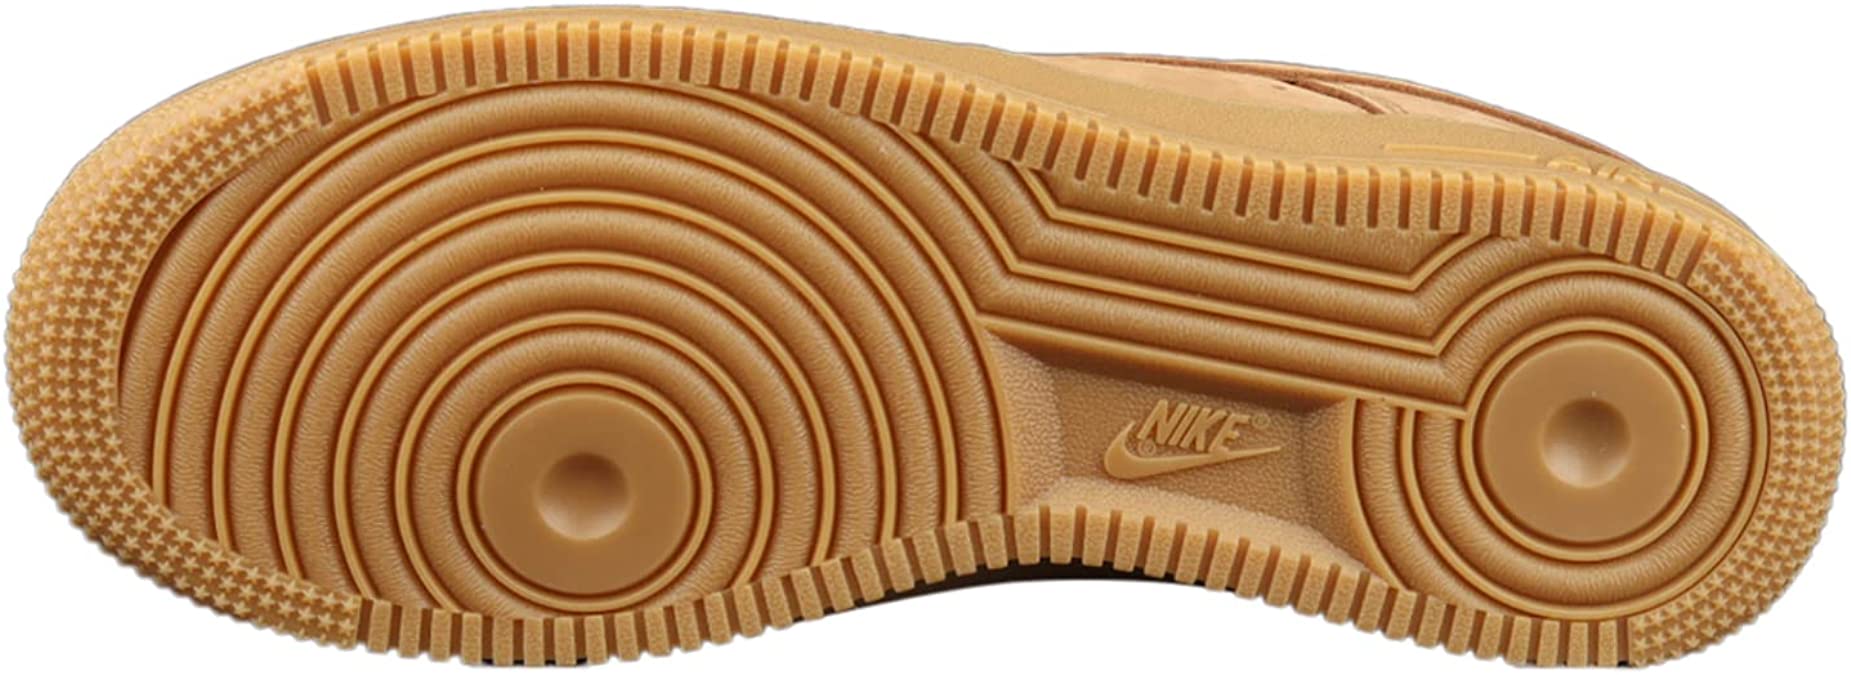 Men's Nike Air Force 1 Low SP Supreme Wheat